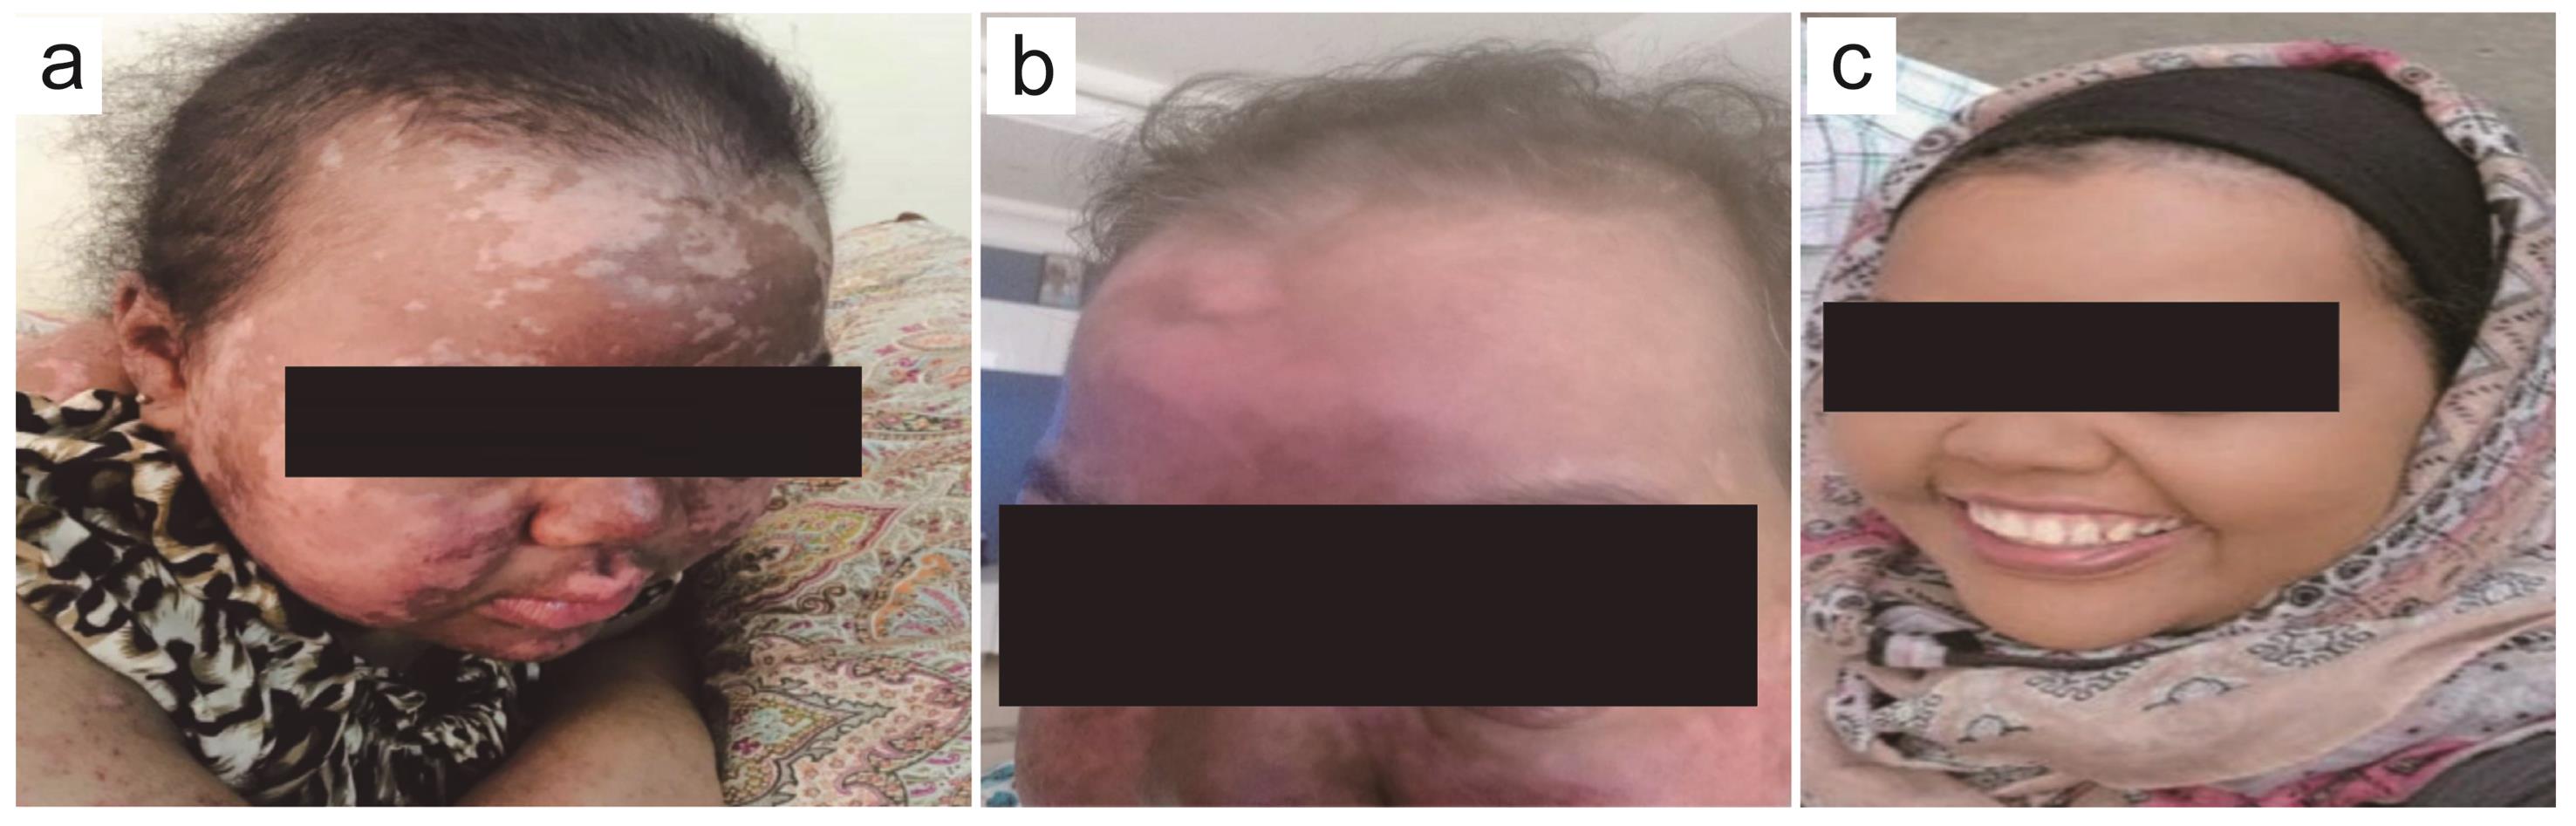 Photos of the patient during the presentation and after discharge.